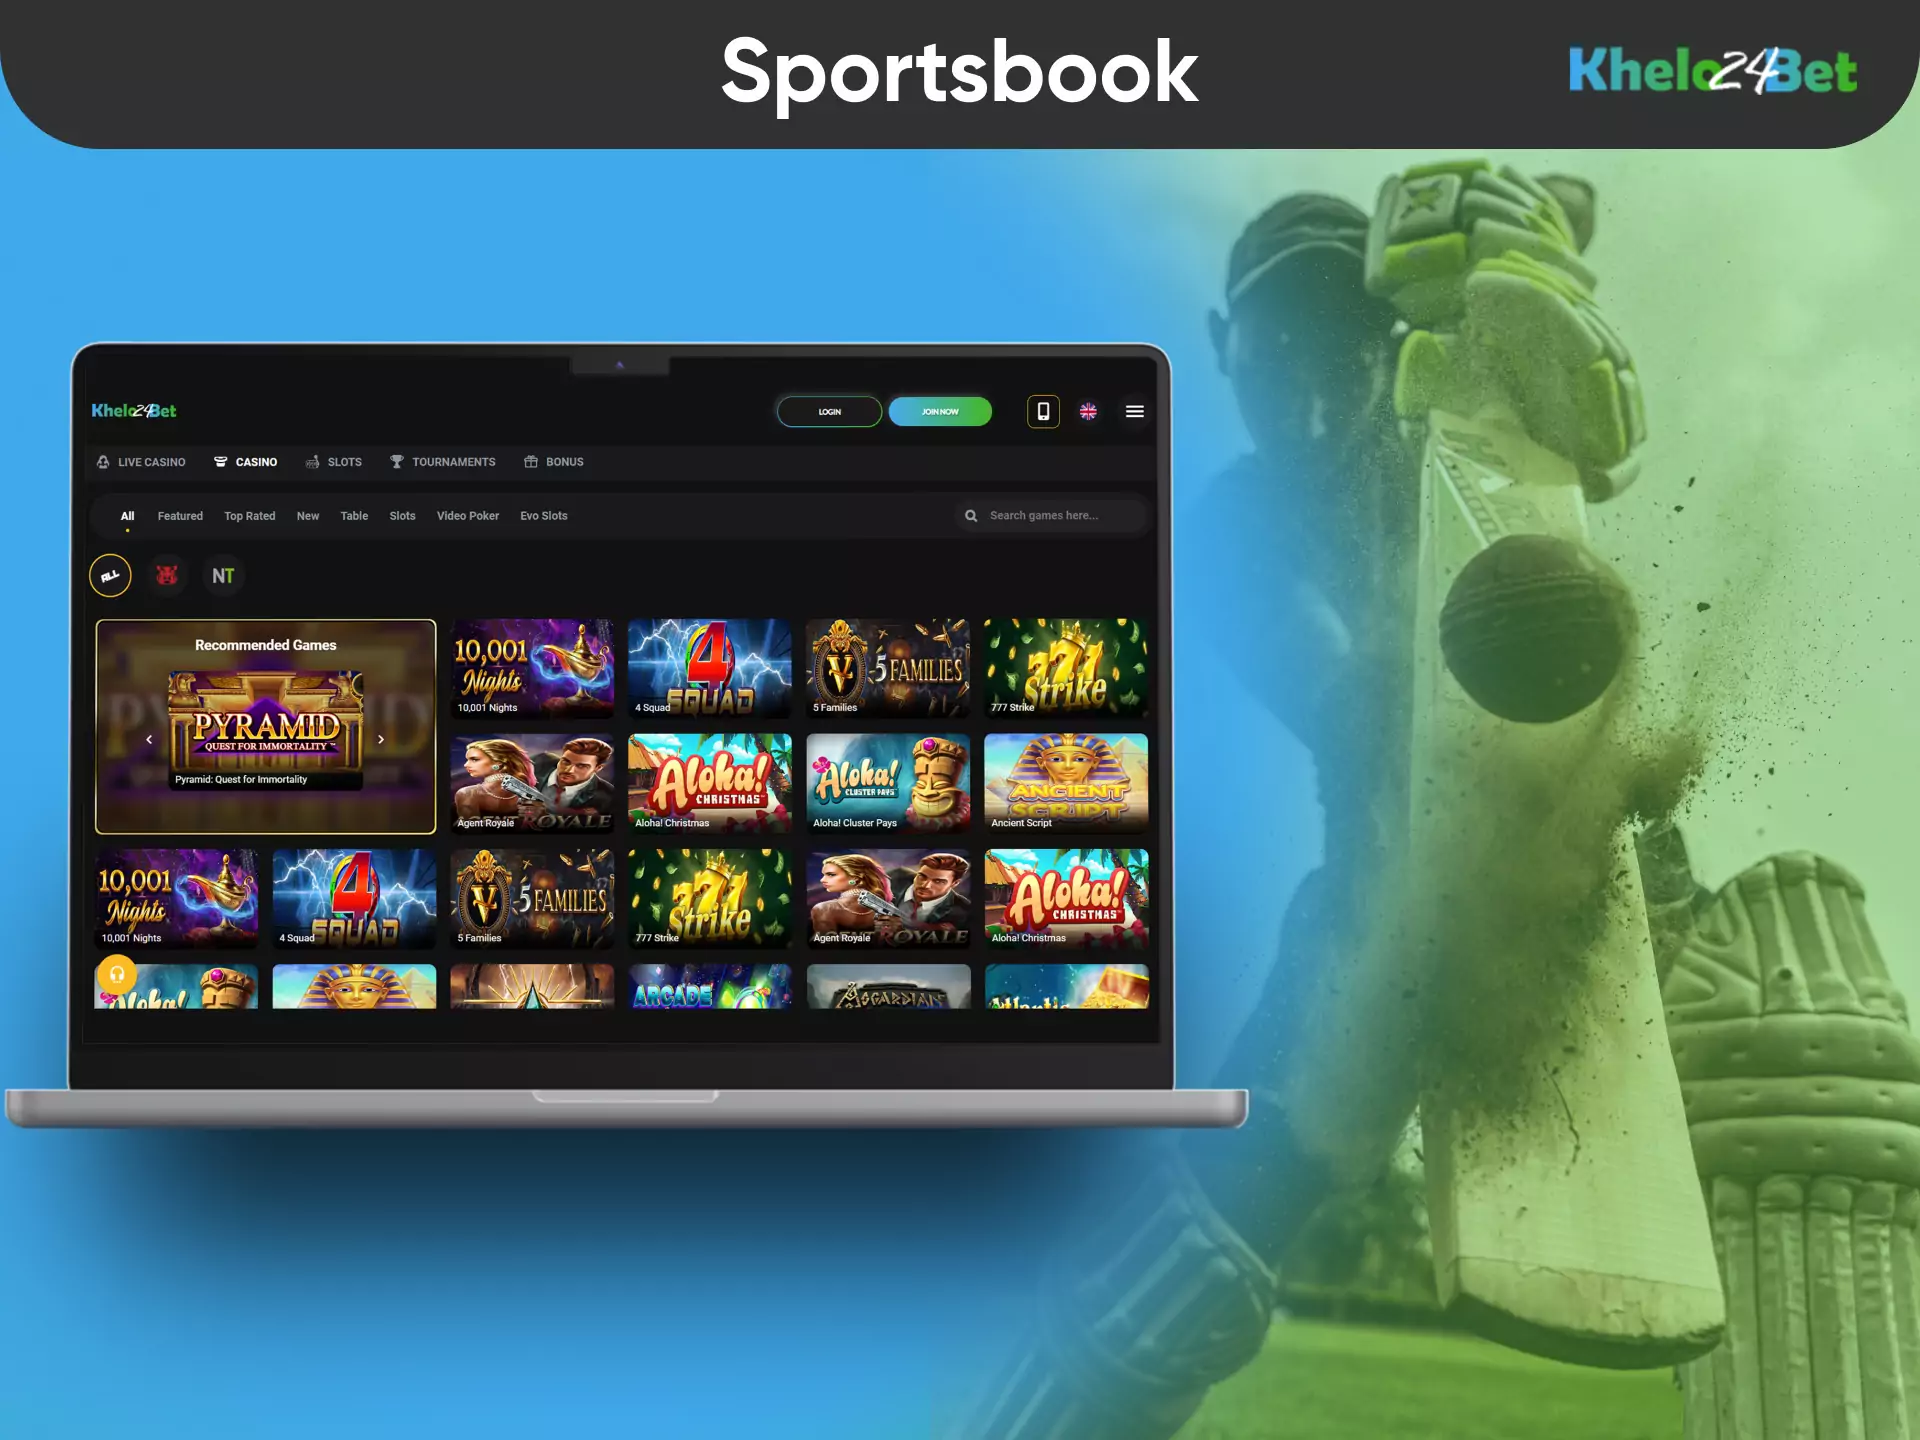 On Khelo24bet, you can place bets on any sports event you find in the list.